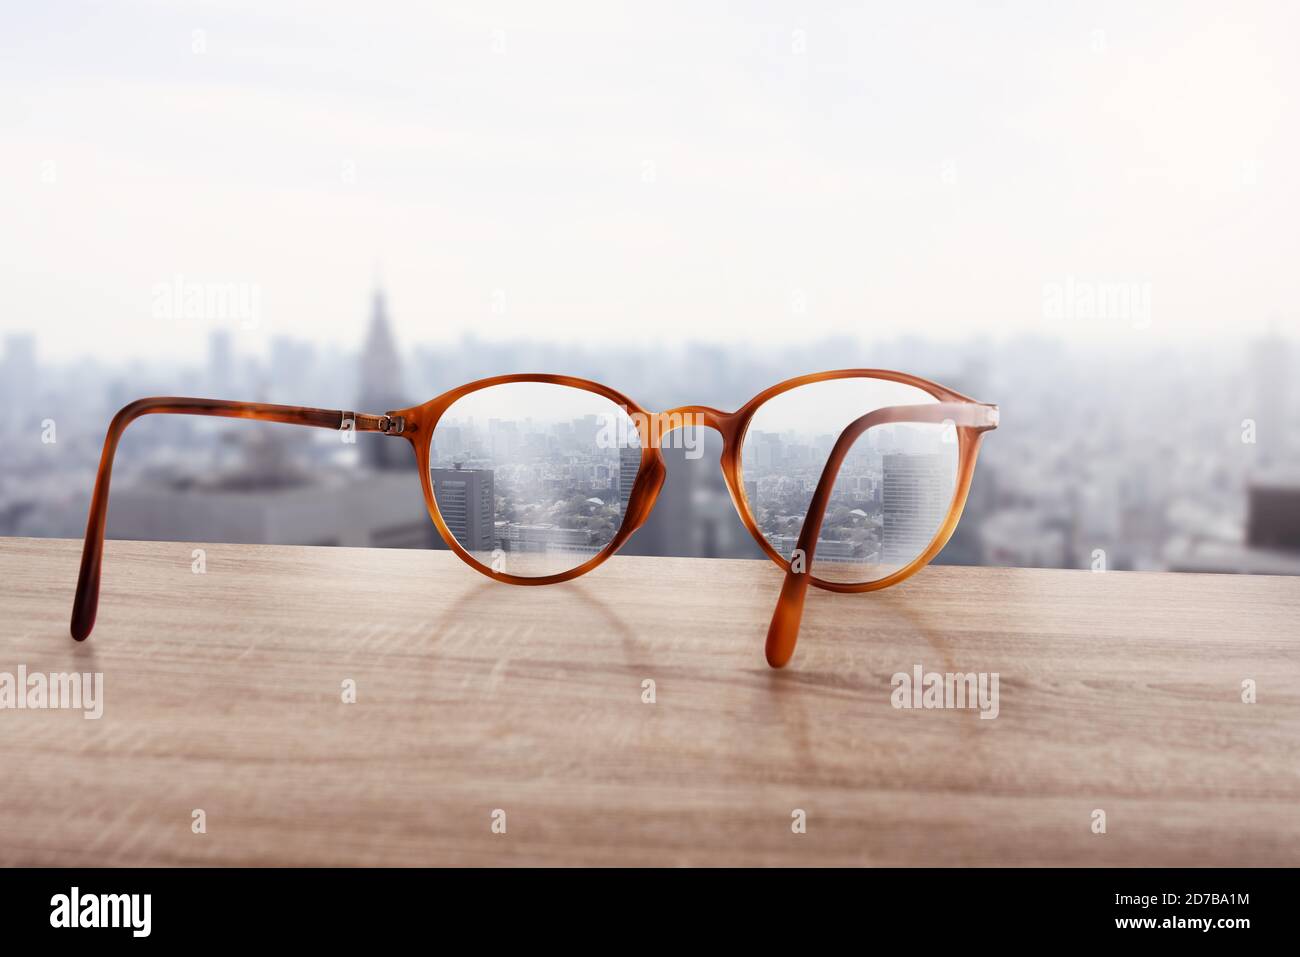 Glasses that correct eyesight from blurred to sharp. Stock Photo